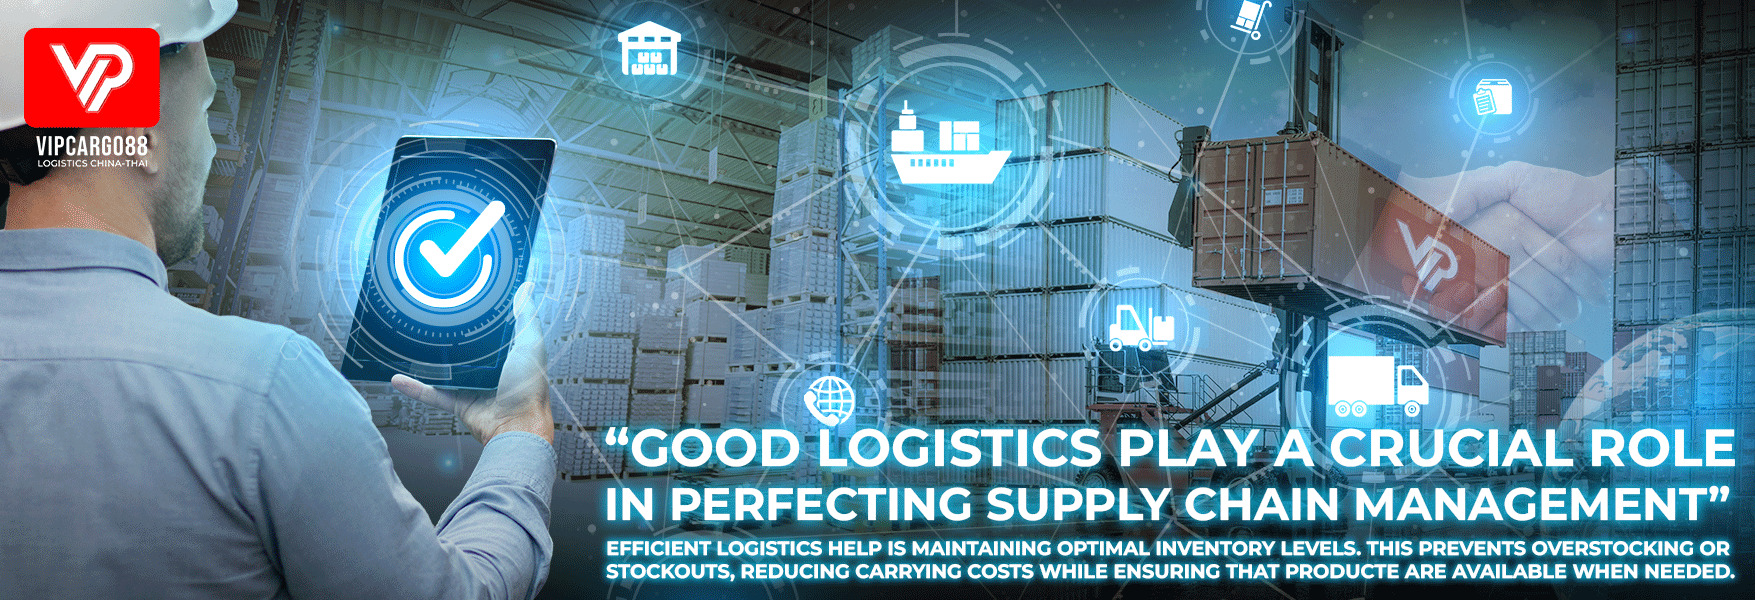 Logistics, importing products, importing products from China legally, importing products from China,